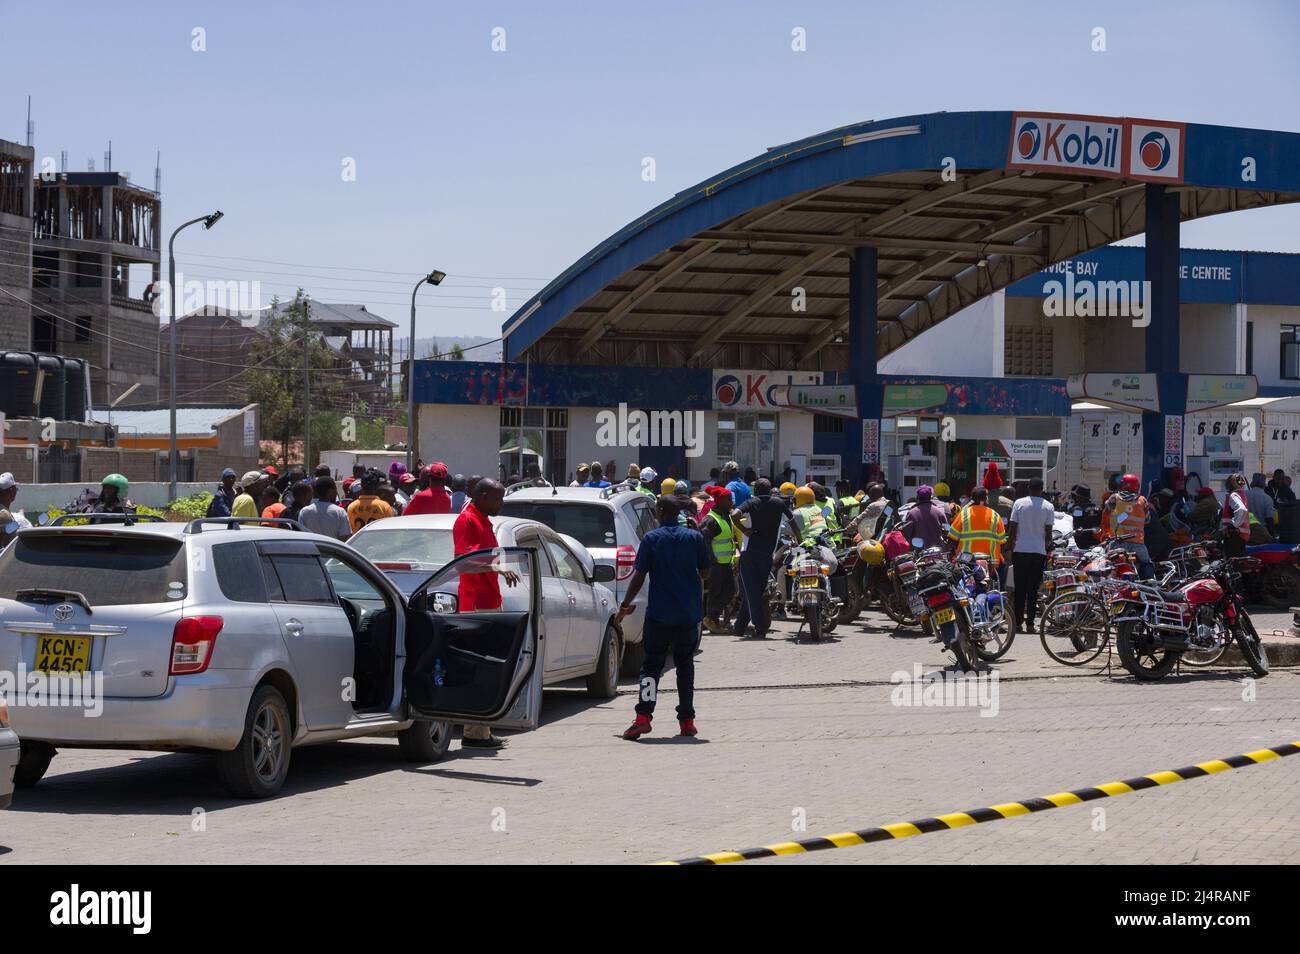 Lines of vehicles with motorists queueing to enter a Kobil petrol station due to fuel shortages in Kenya, East Africa Stock Photo